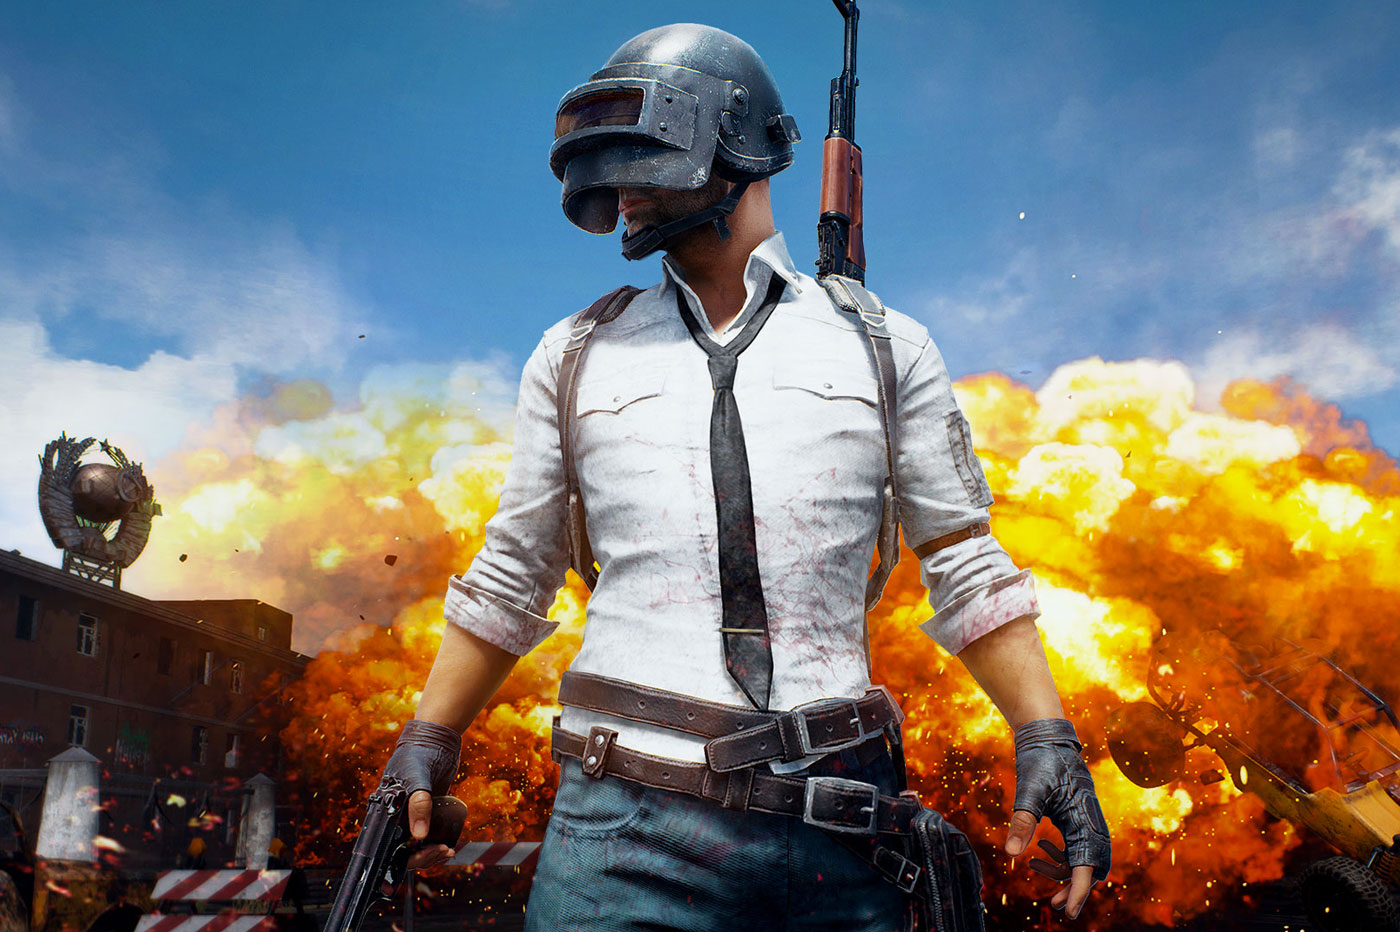 Download failed because you may not have purchased this app pubg mobile фото 112